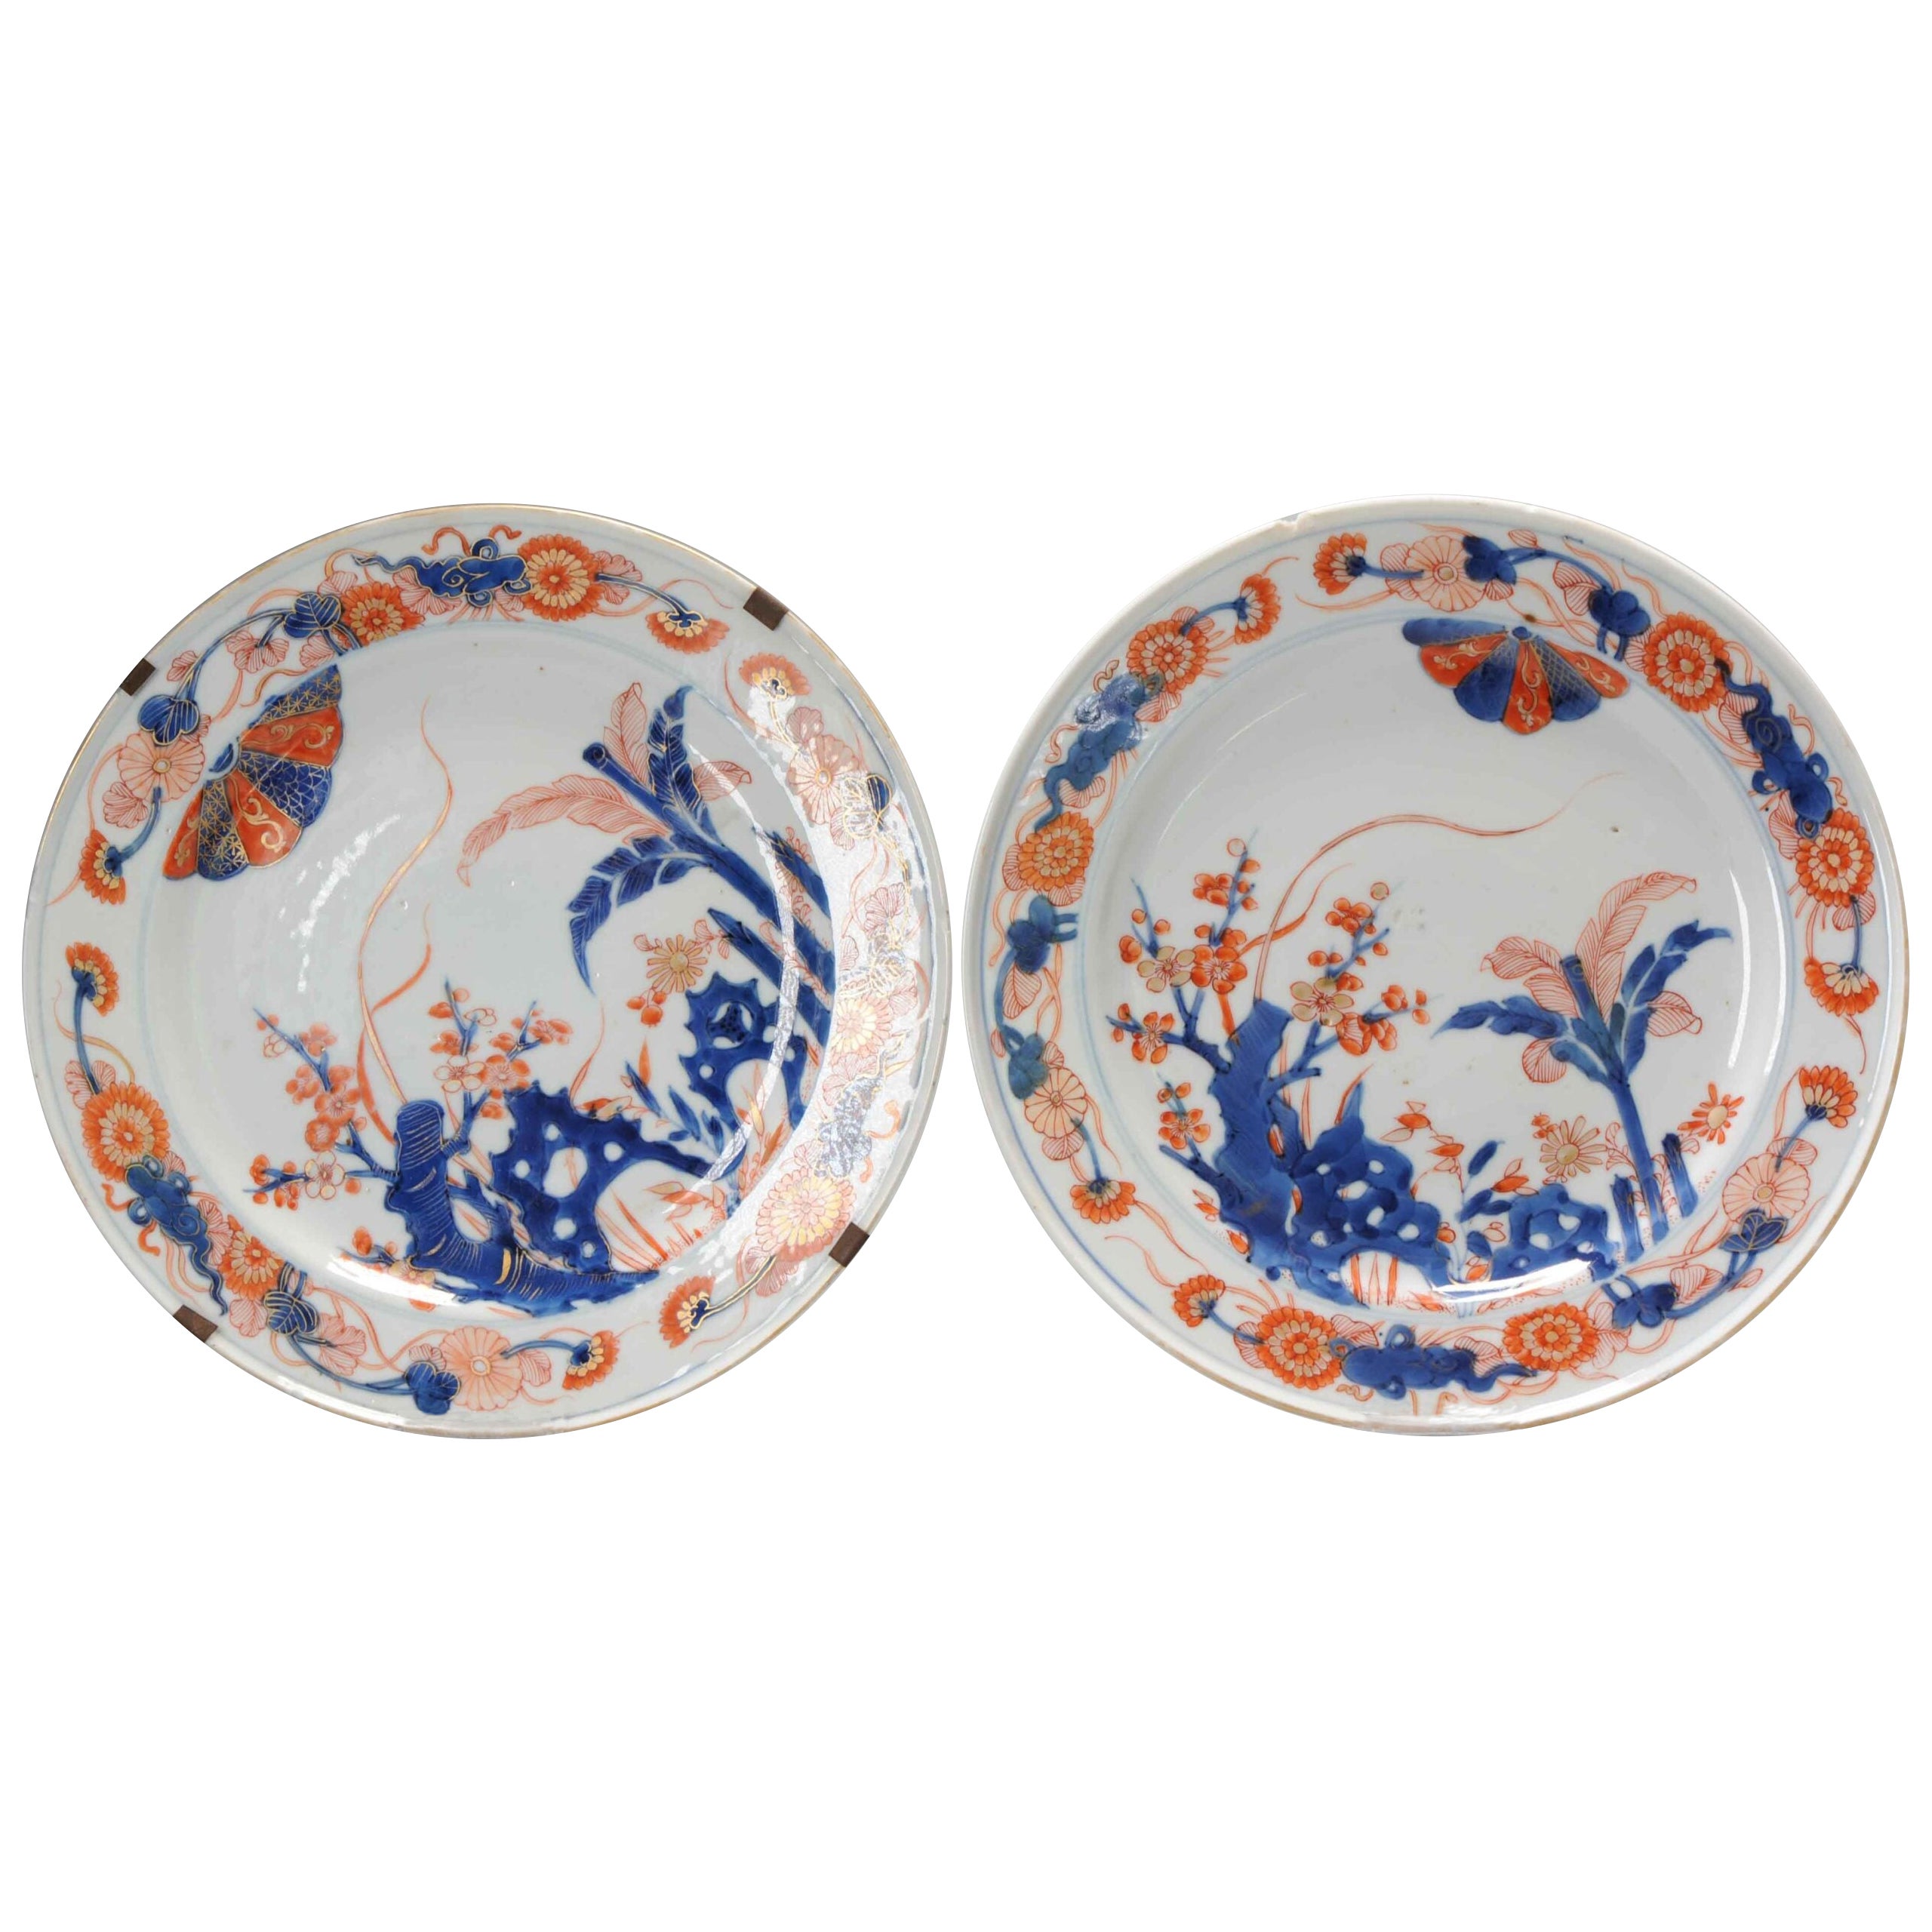 A Pair of Rare Chinese Porcelain Imari Flat Plates Kangxi Period Floral Marked For Sale